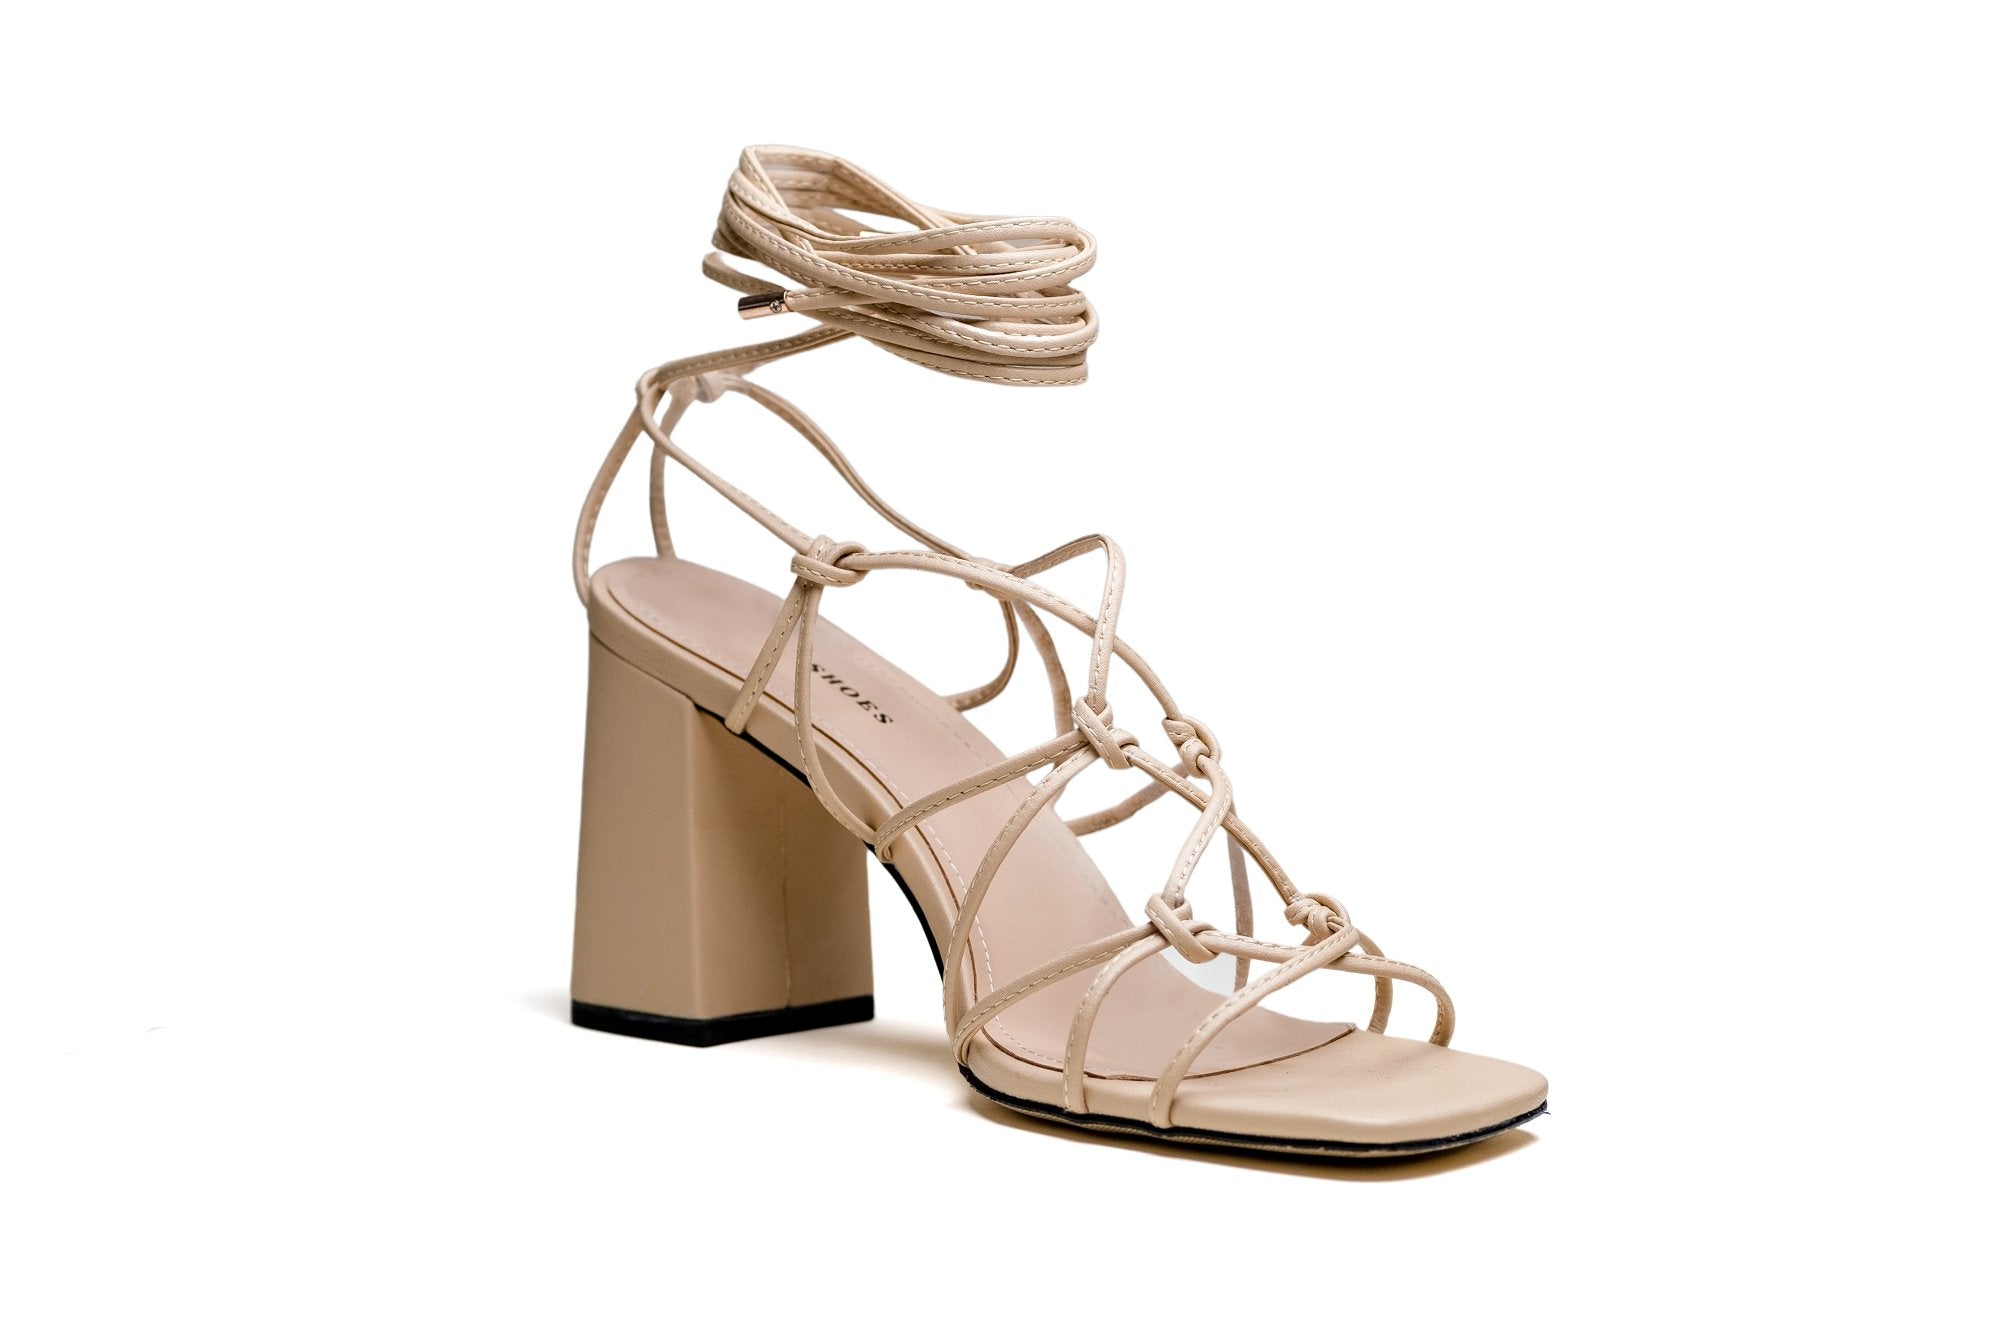 SAMPLE Eloise Strappy Sandal Nude by Sole Shoes NZ Eloise-SN